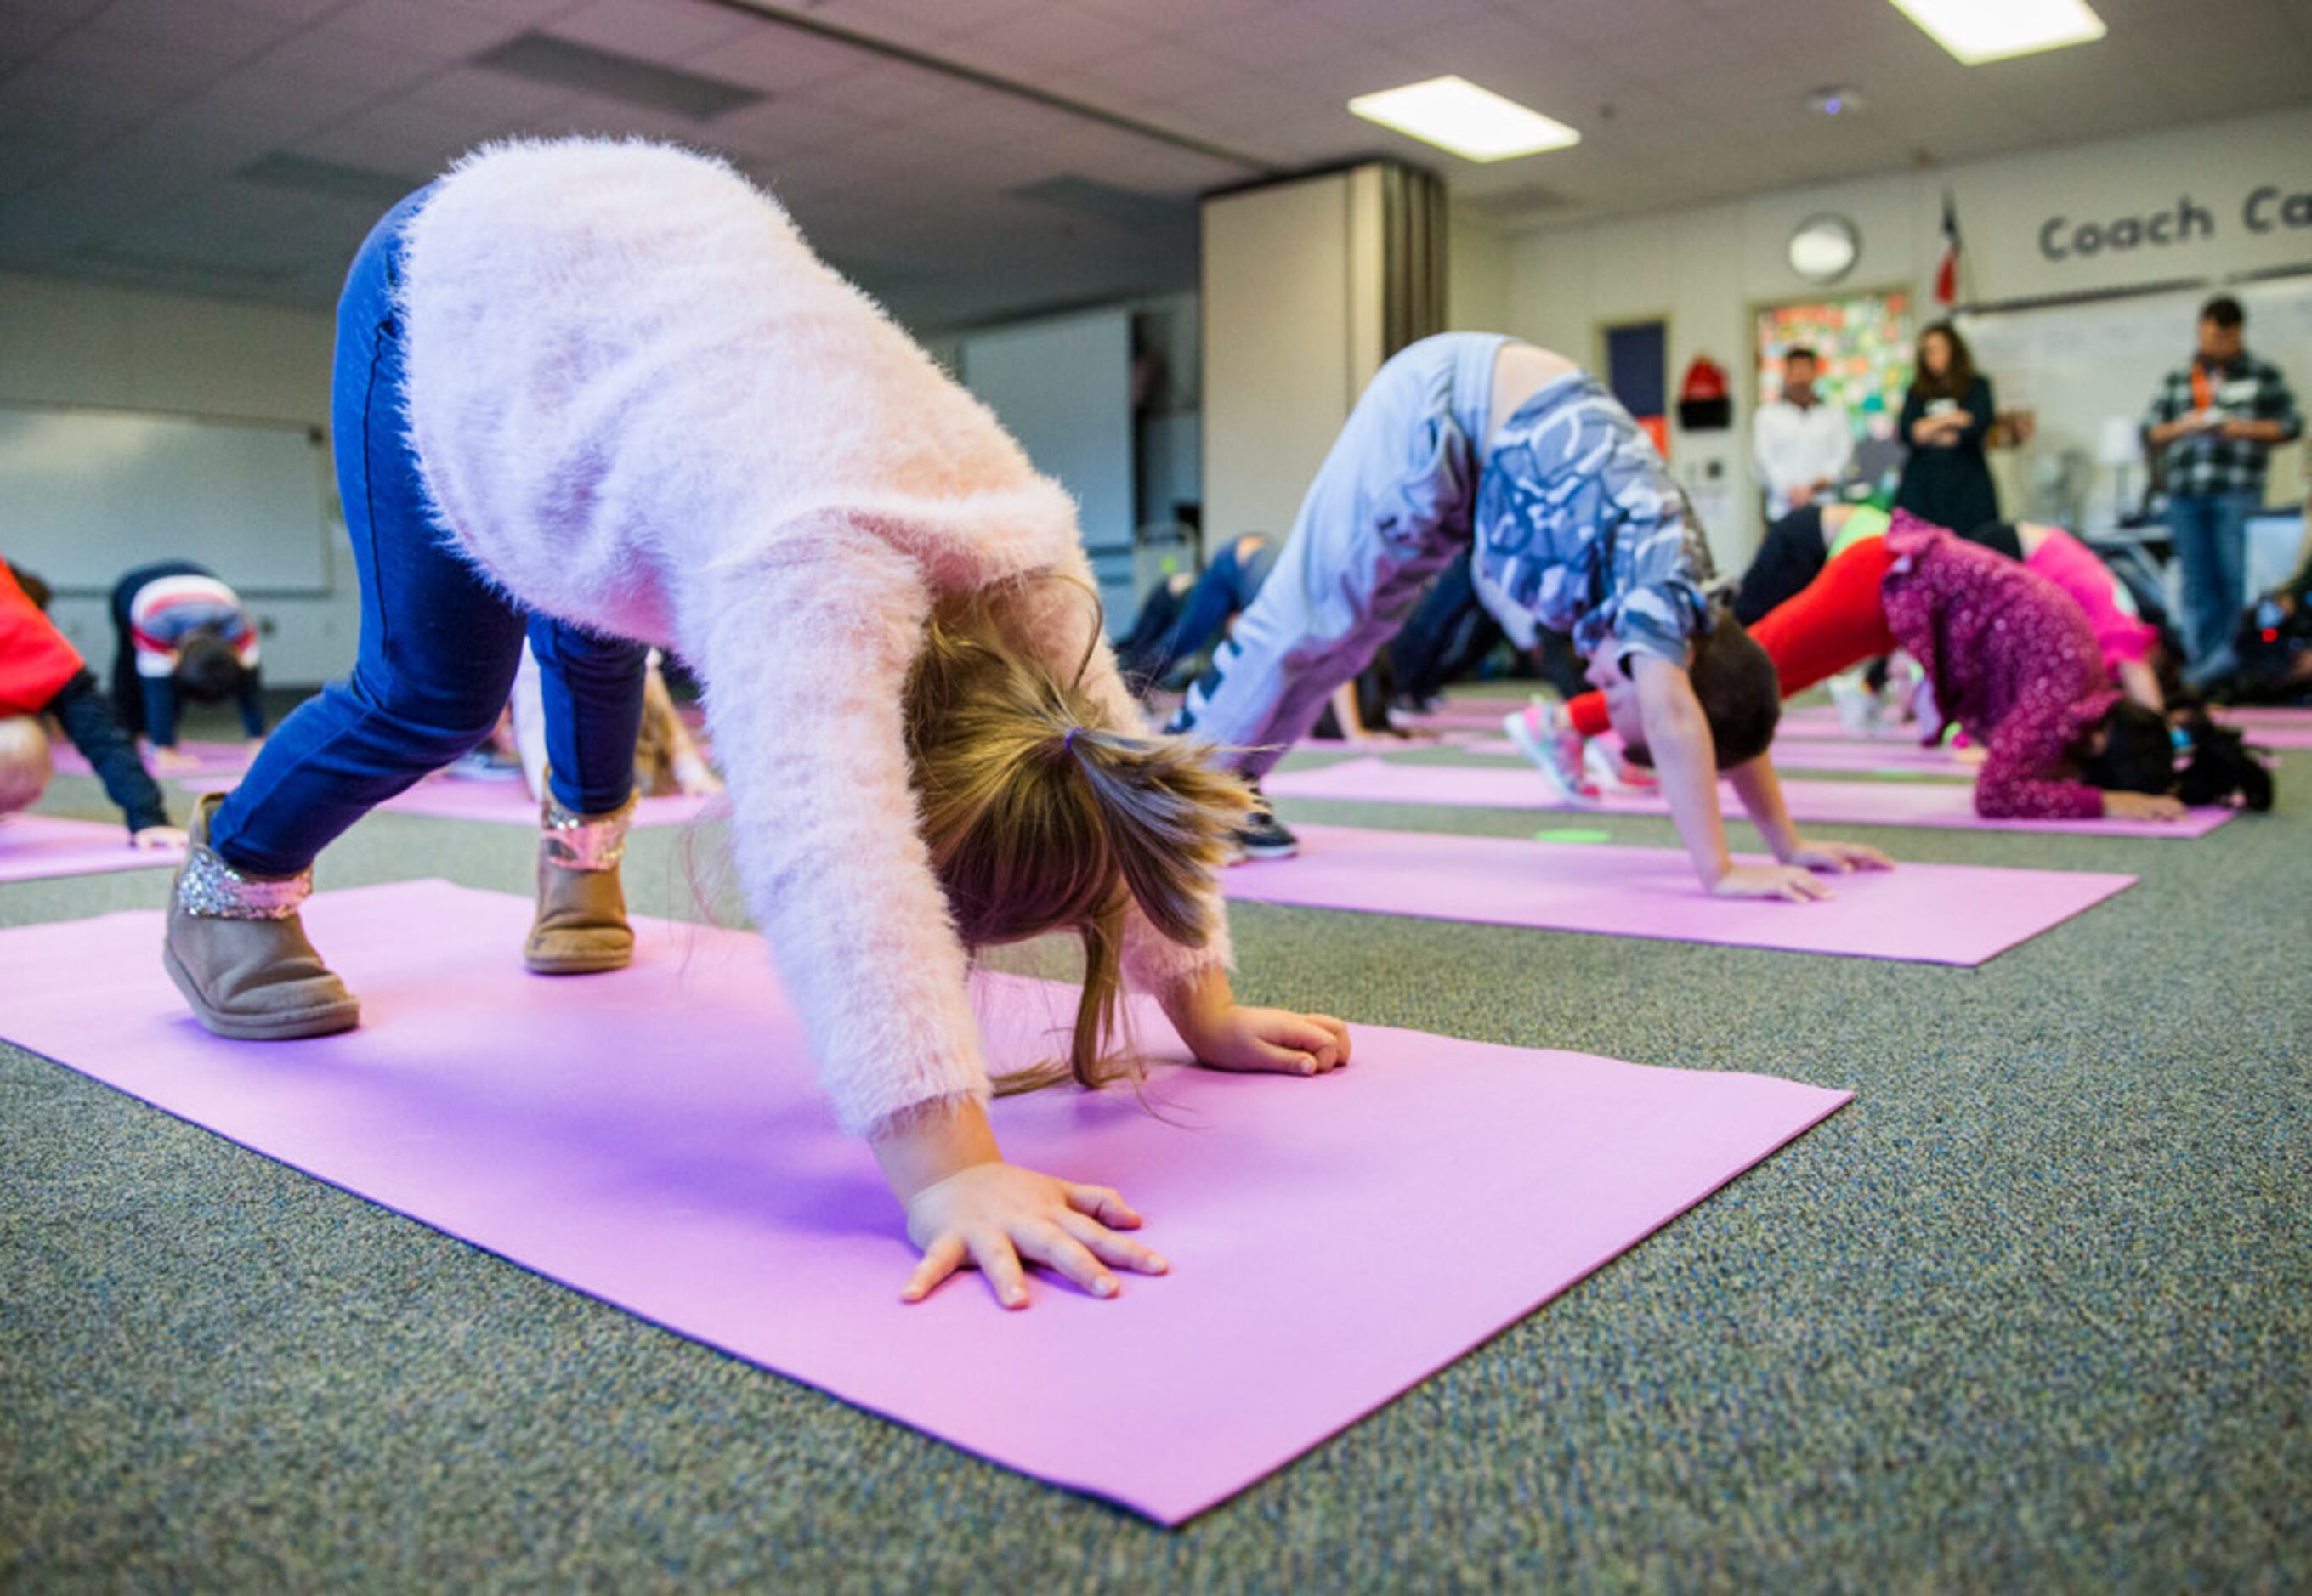 Marble Falls Middle School yoga class stretches beyond physical education  requirements 